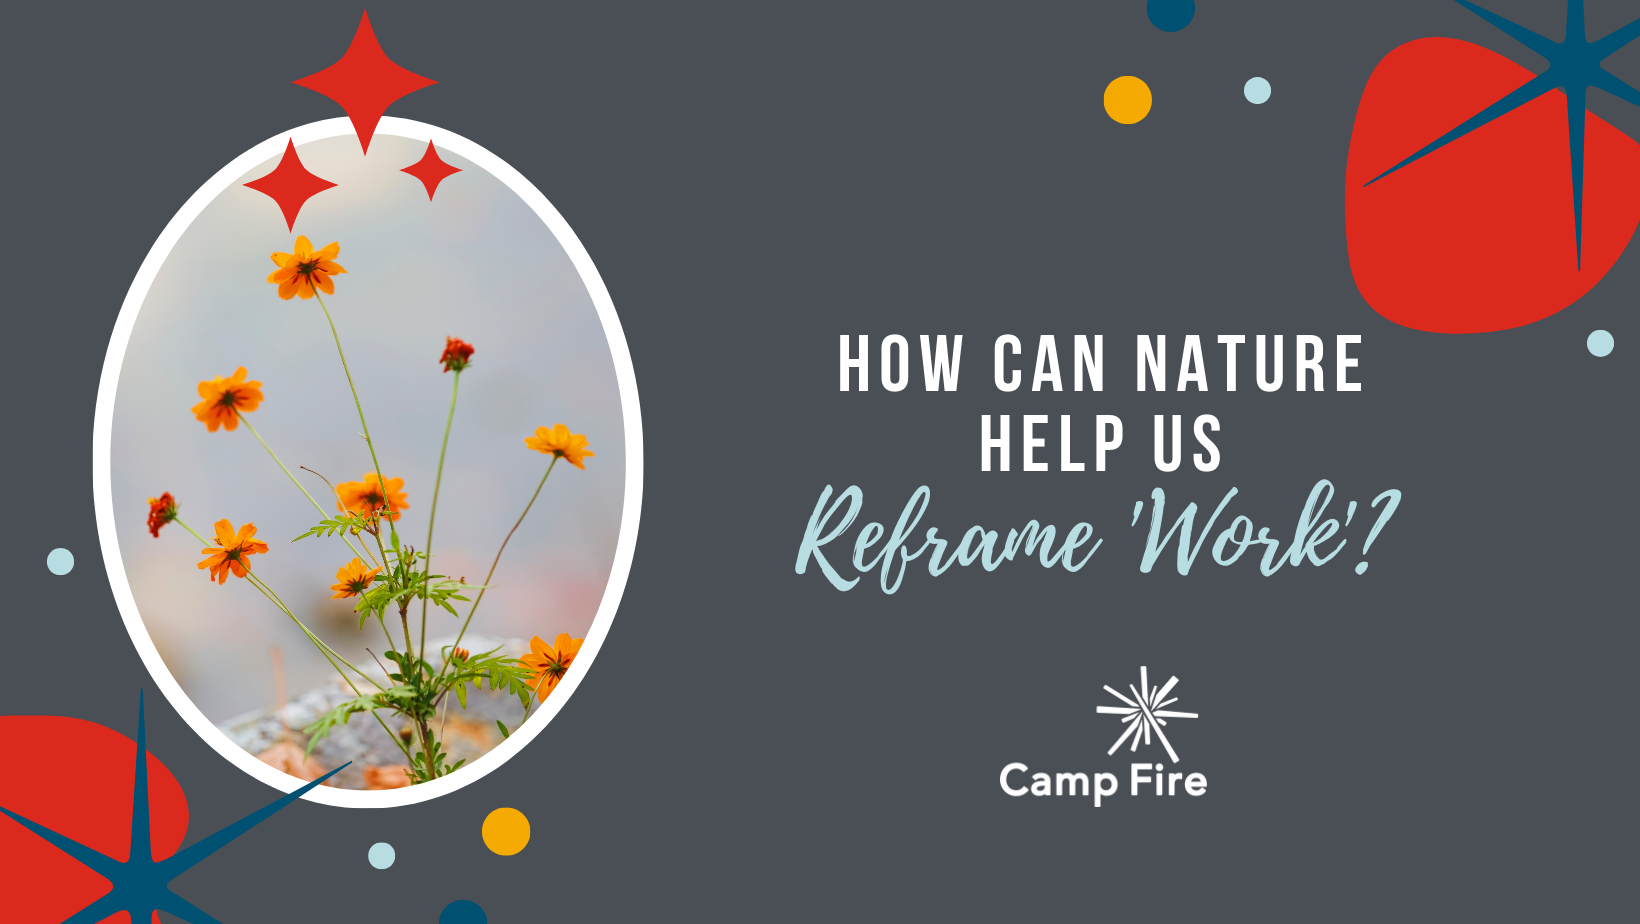 How Can Nature Help Us Reframe 'Work'?, a Camp Fire blog